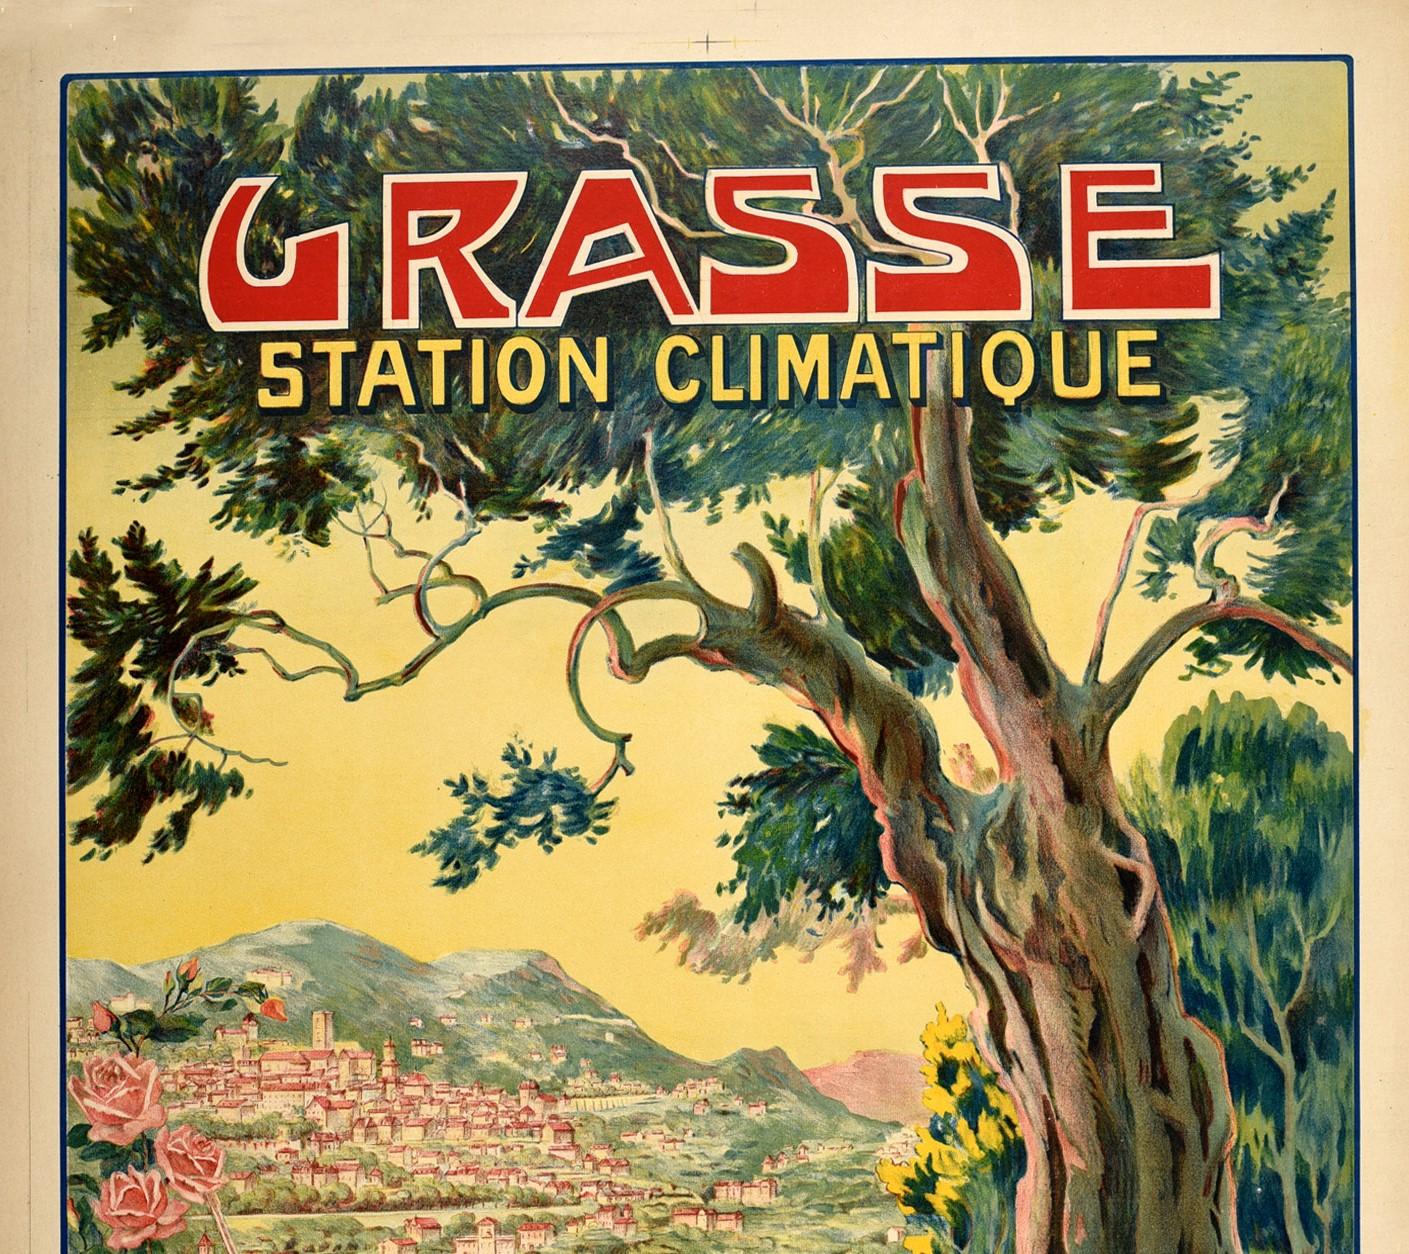 Original vintage travel advertising poster for Grasse in the Alpes-Maritimes region of the French Riviera - Grasse Station Climatique son ciel bleu, son air pur, son panorama merveilleux, ses eaux incomparables, ses jardins and ses parcs, ses